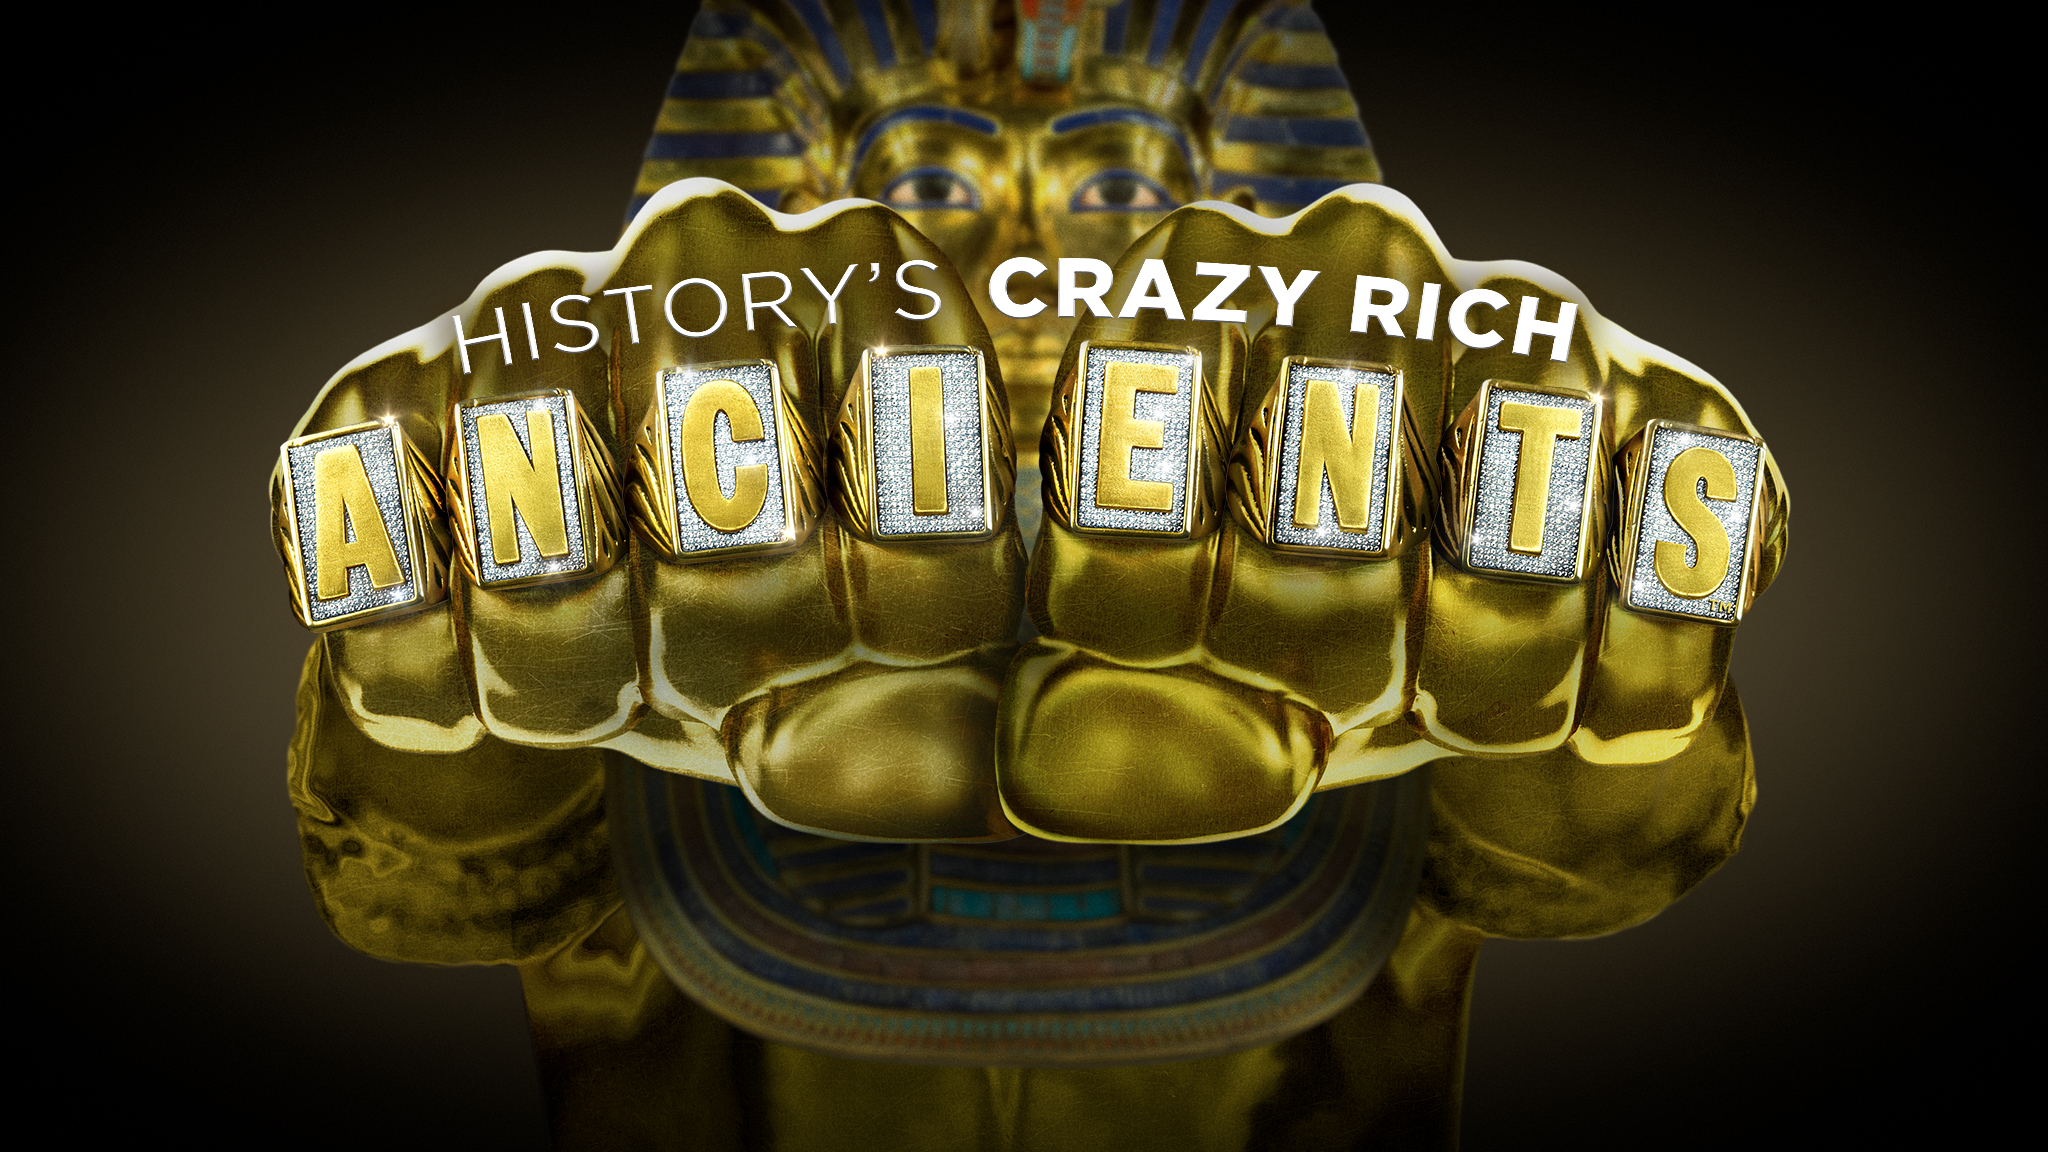 Watch 'History's Crazy Rich Ancients' on HISTORY Vault	